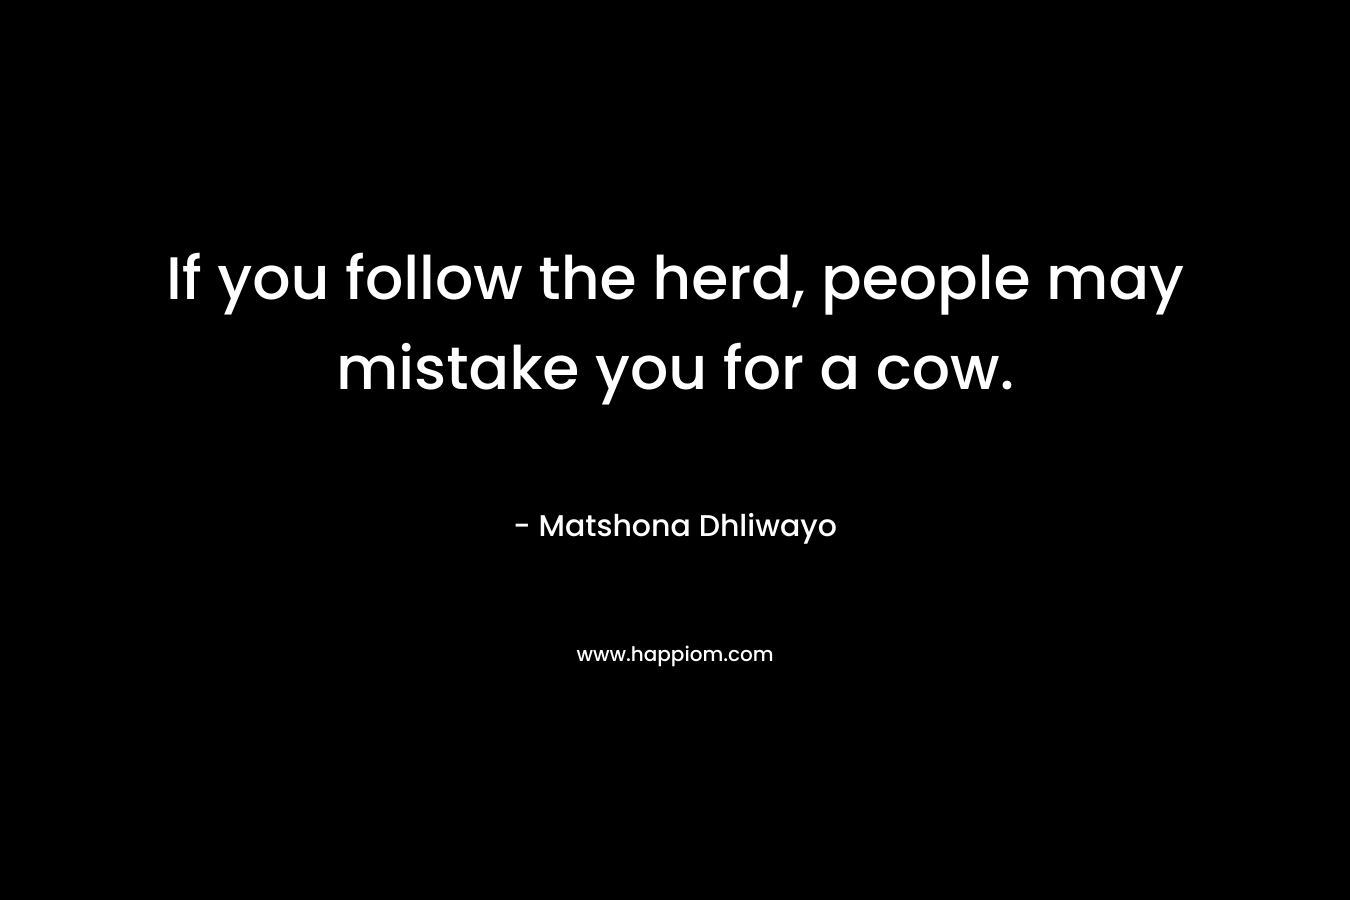 If you follow the herd, people may mistake you for a cow.